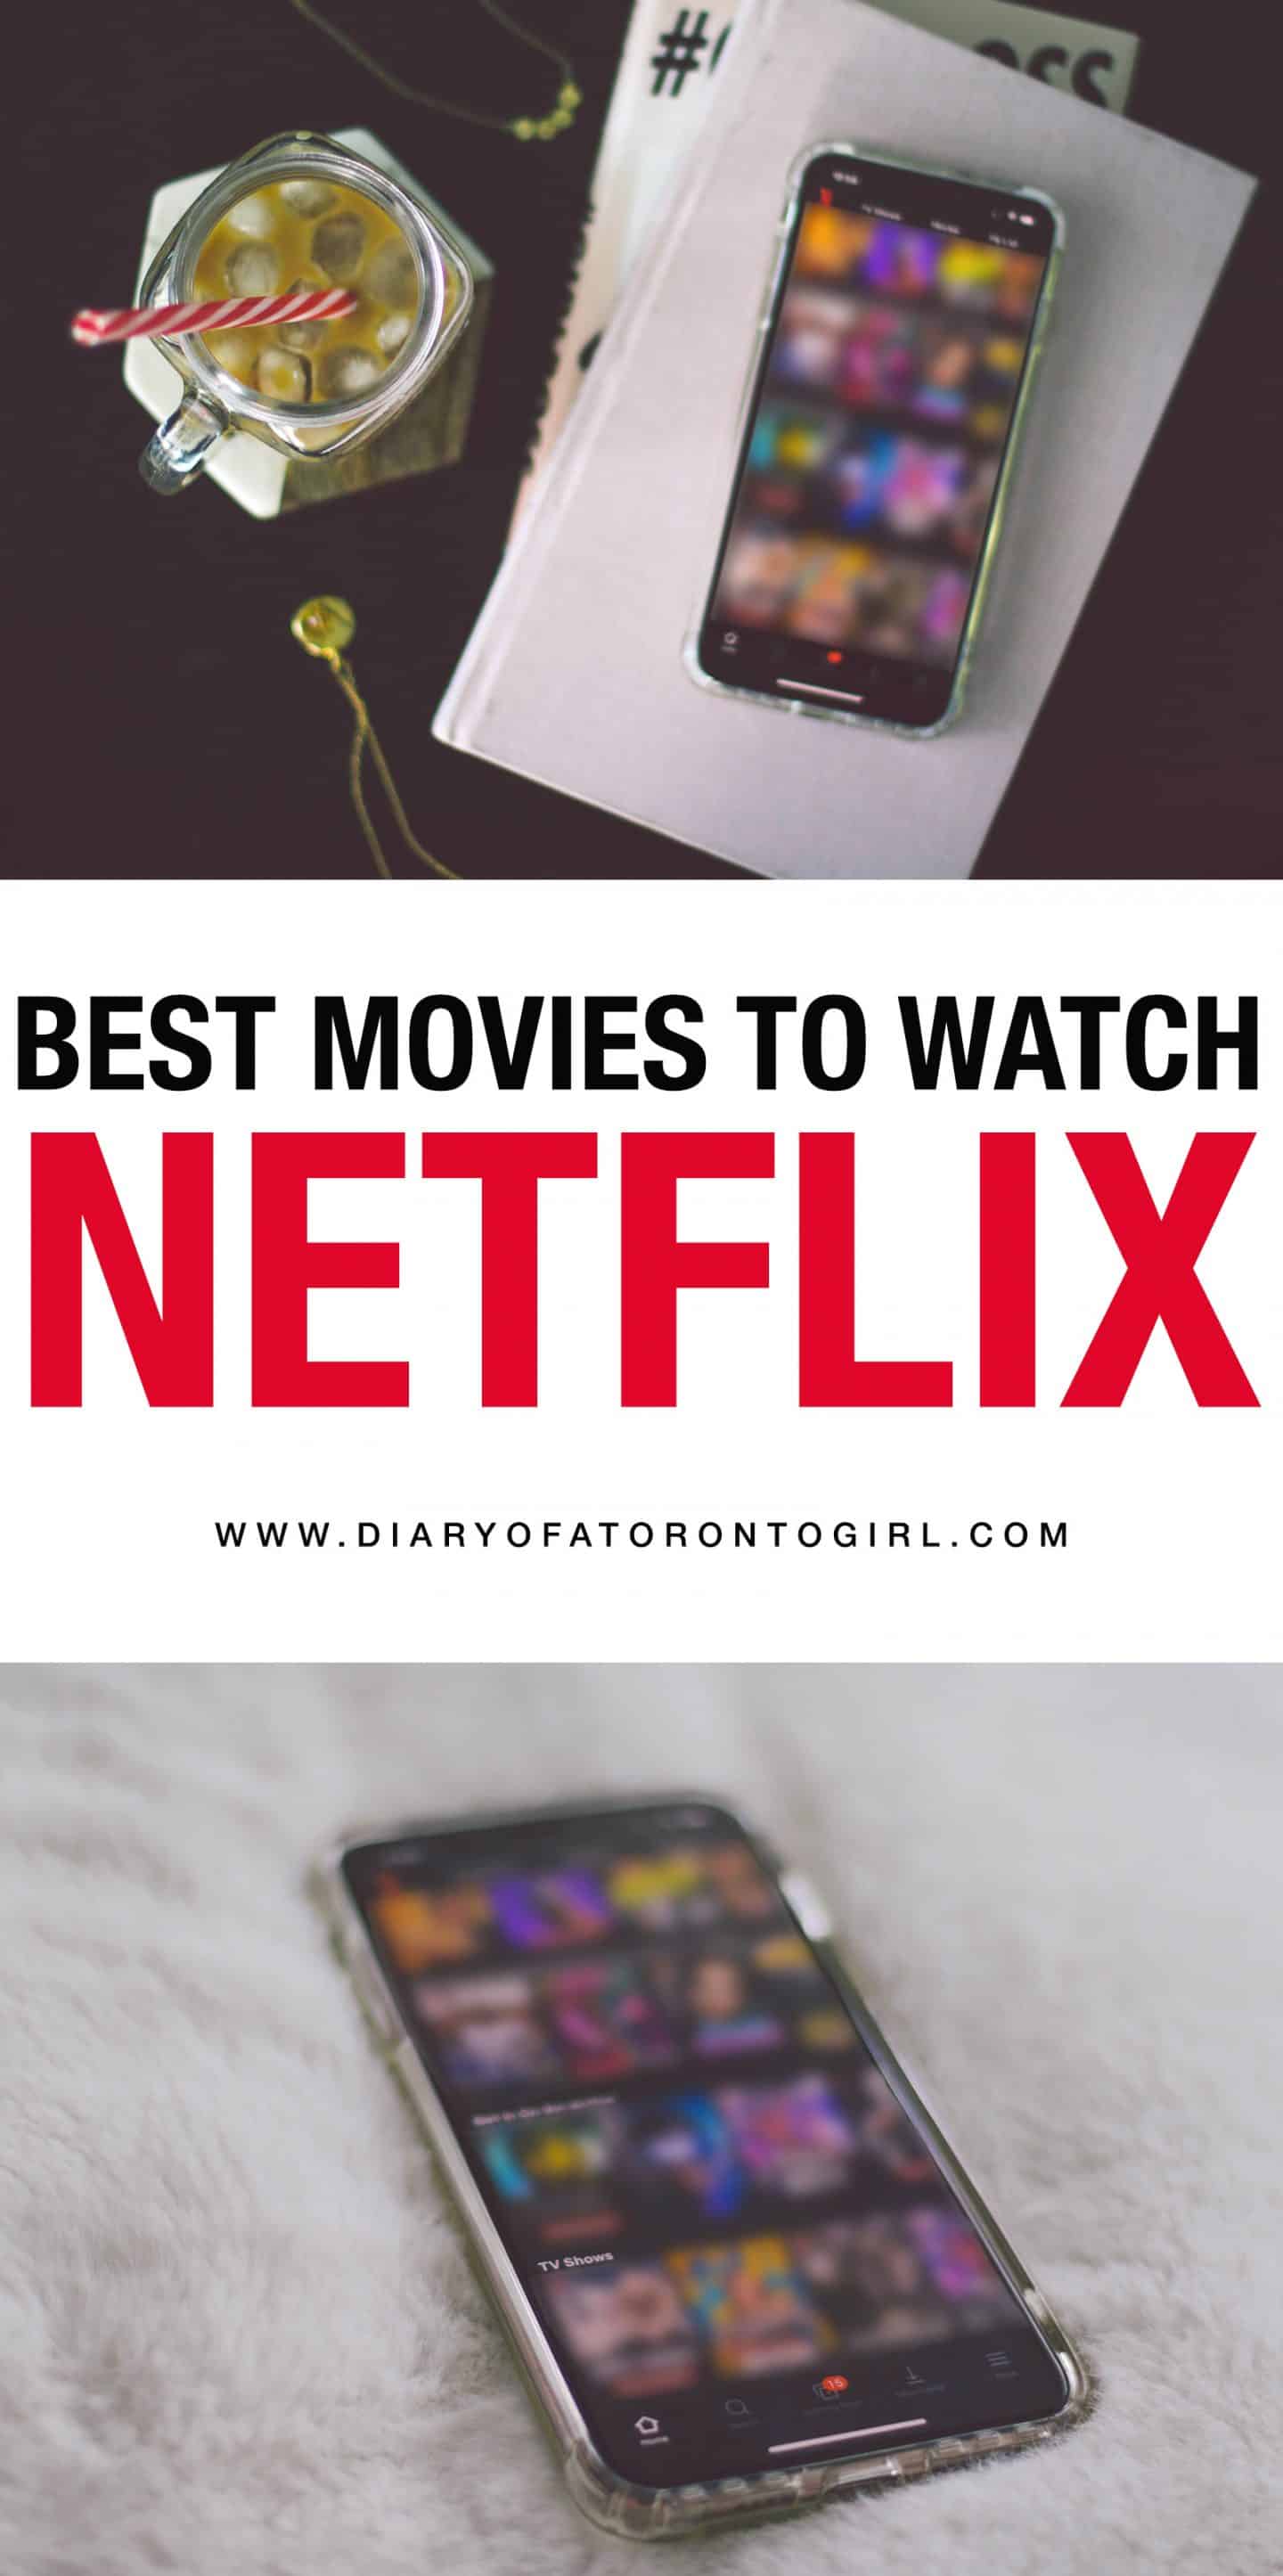 Planning a Netflix movie marathon? Here are some of the best films and movies to binge-watch on Netflix Canada for my fellow Canadians!